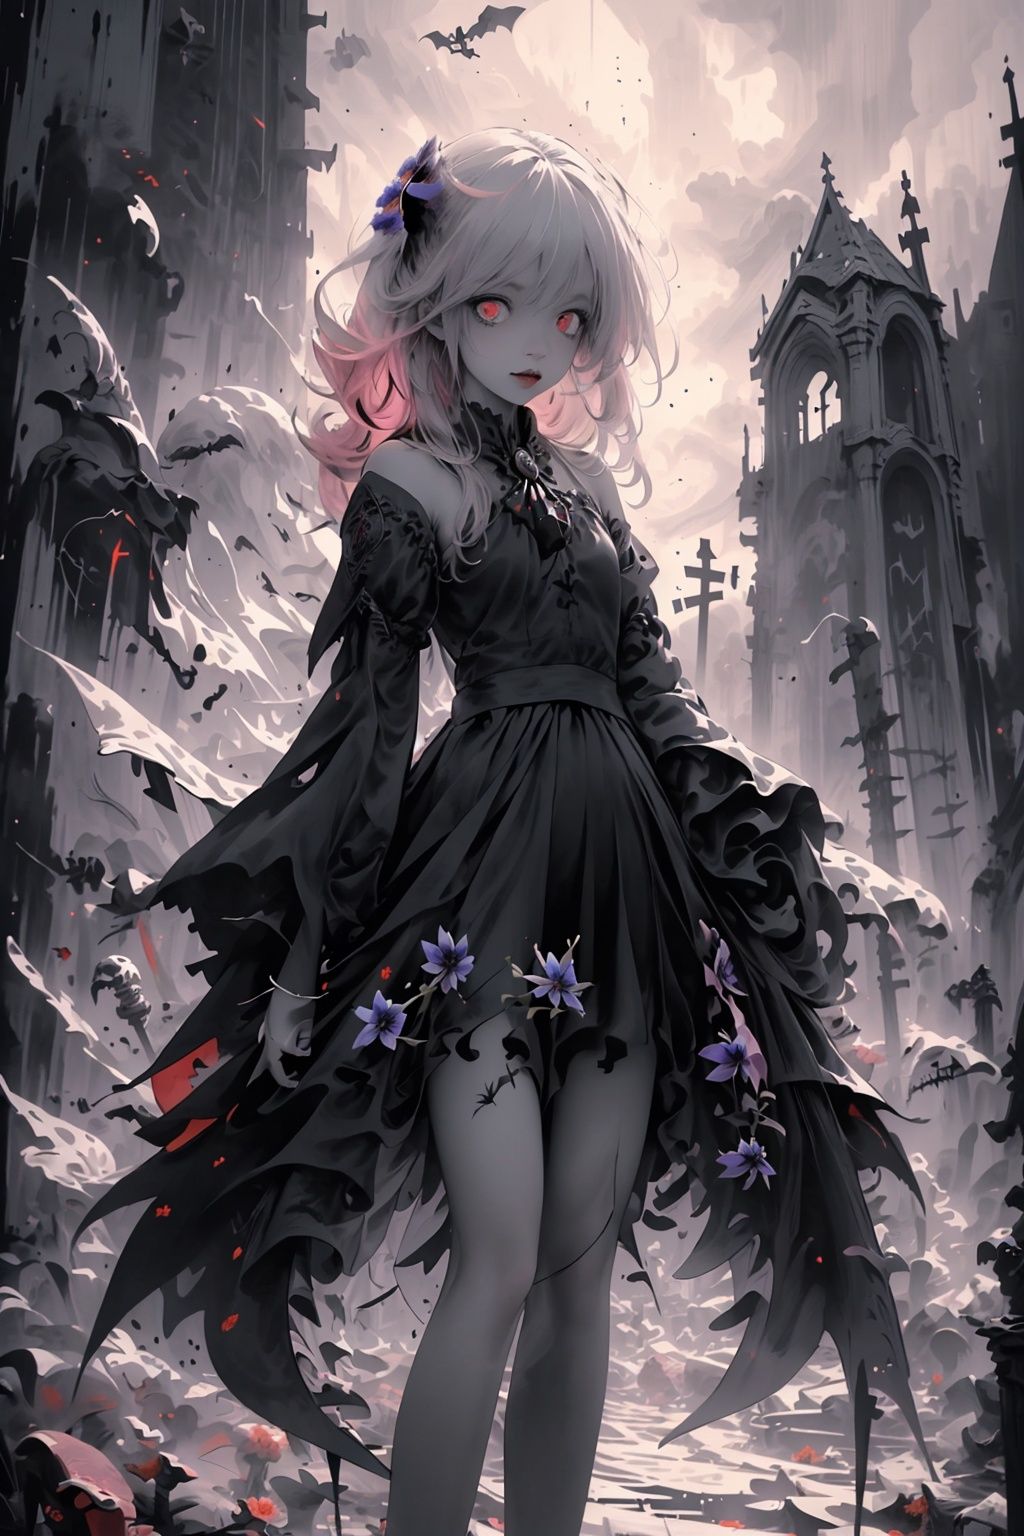 ((1girl,solo, alone, delicate face, cute, red eye pupil, pink eyelashes, red eye shadow, pink lips,excellent face,expression is enchanting,)), Character close-up,
leaning against the ruins, with a floating skeleton in the background,her posture is seductive,and there is a flicker of evil energy runes in the background, blood mist filled, and soft light. No shoes,My feet are covered in bones. Skeletons, many skeletons. Official art, unit 8 k wallpaper, ultra detailed, beautiful and aesthetic, masterpiece, best quality, extremely detailed, dynamic angle, paper skin, radius, iuminosity, cowboyshot, the most beautiful form of Chaos, elegant, a brutalist designed, visual colors, romanticism, by James Jean, roby dwi antono, cross tran, francis bacon, Michael mraz, Adrian ghenie, Petra cortright, Gerhard richter, Takato yamamoto, ashley wood, atmospheric, ((late at night,dark)), light rain,dark, limited palette, contrast,(((Cornflower))), corn